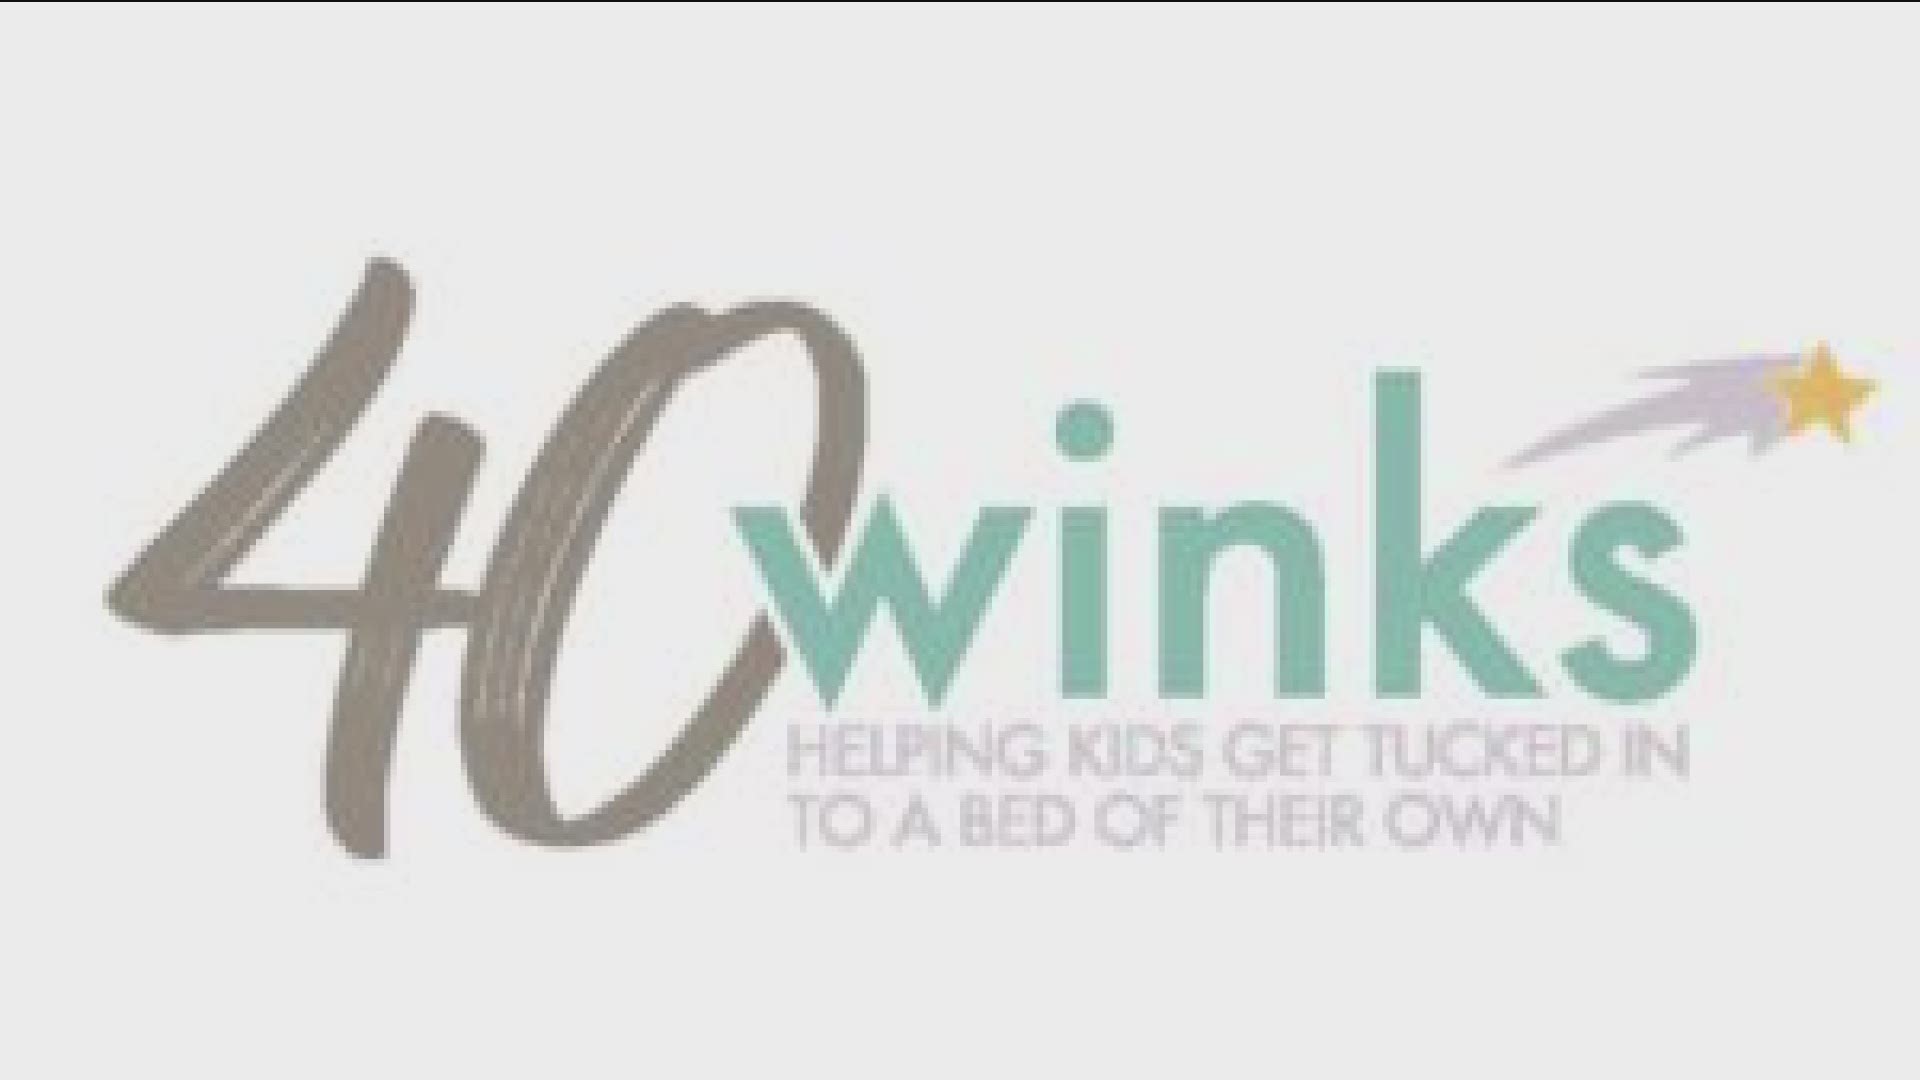 Beds for kids from the 40 Winks Foundation